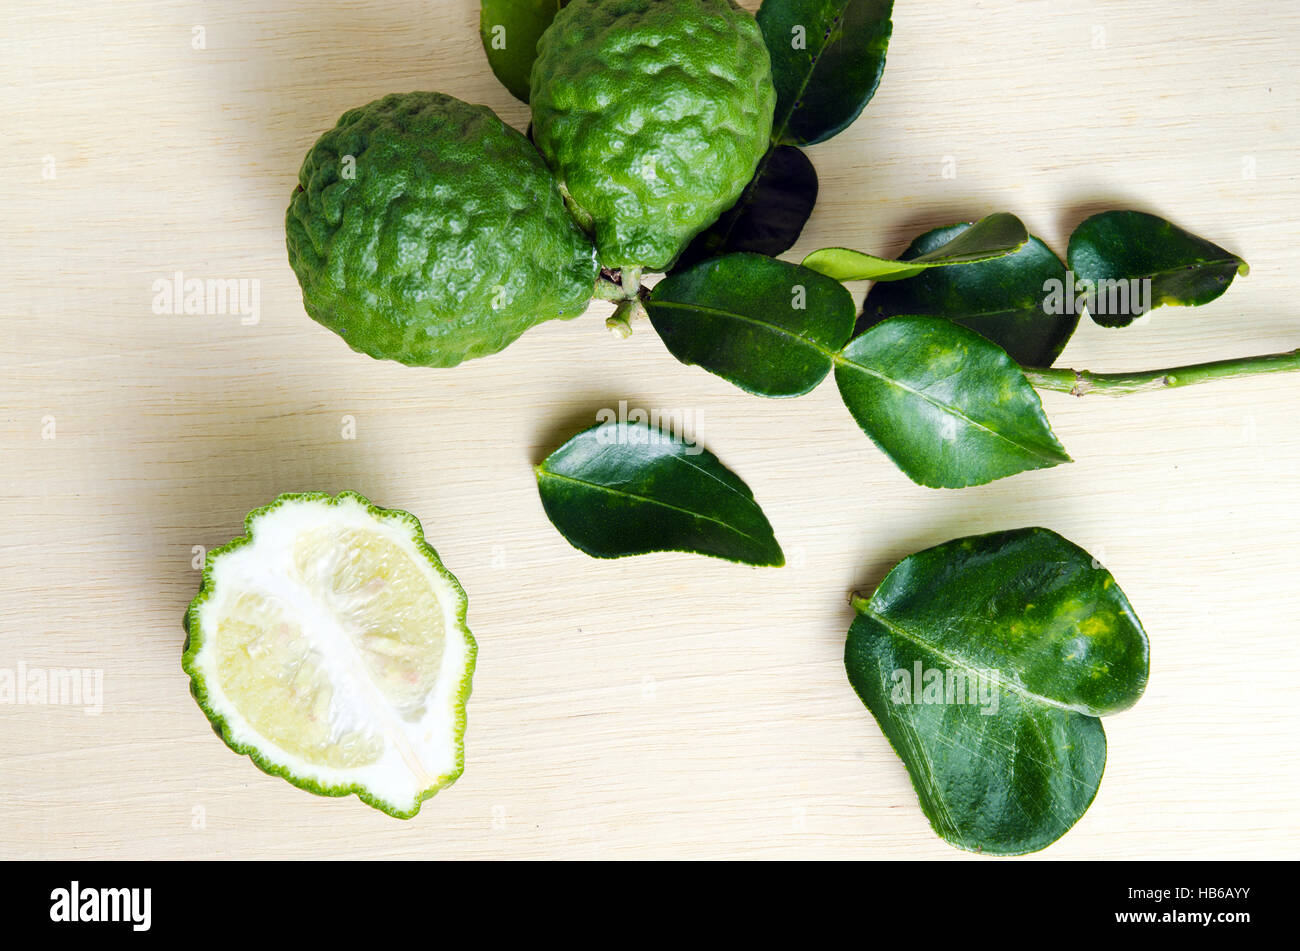 Bergamot (Also known as Kaffir lime, Citrus lime, Citrus bergamia, Citrus, Bergamot, Magnoliophyta Rutaceae) fruits with leaf Stock Photo